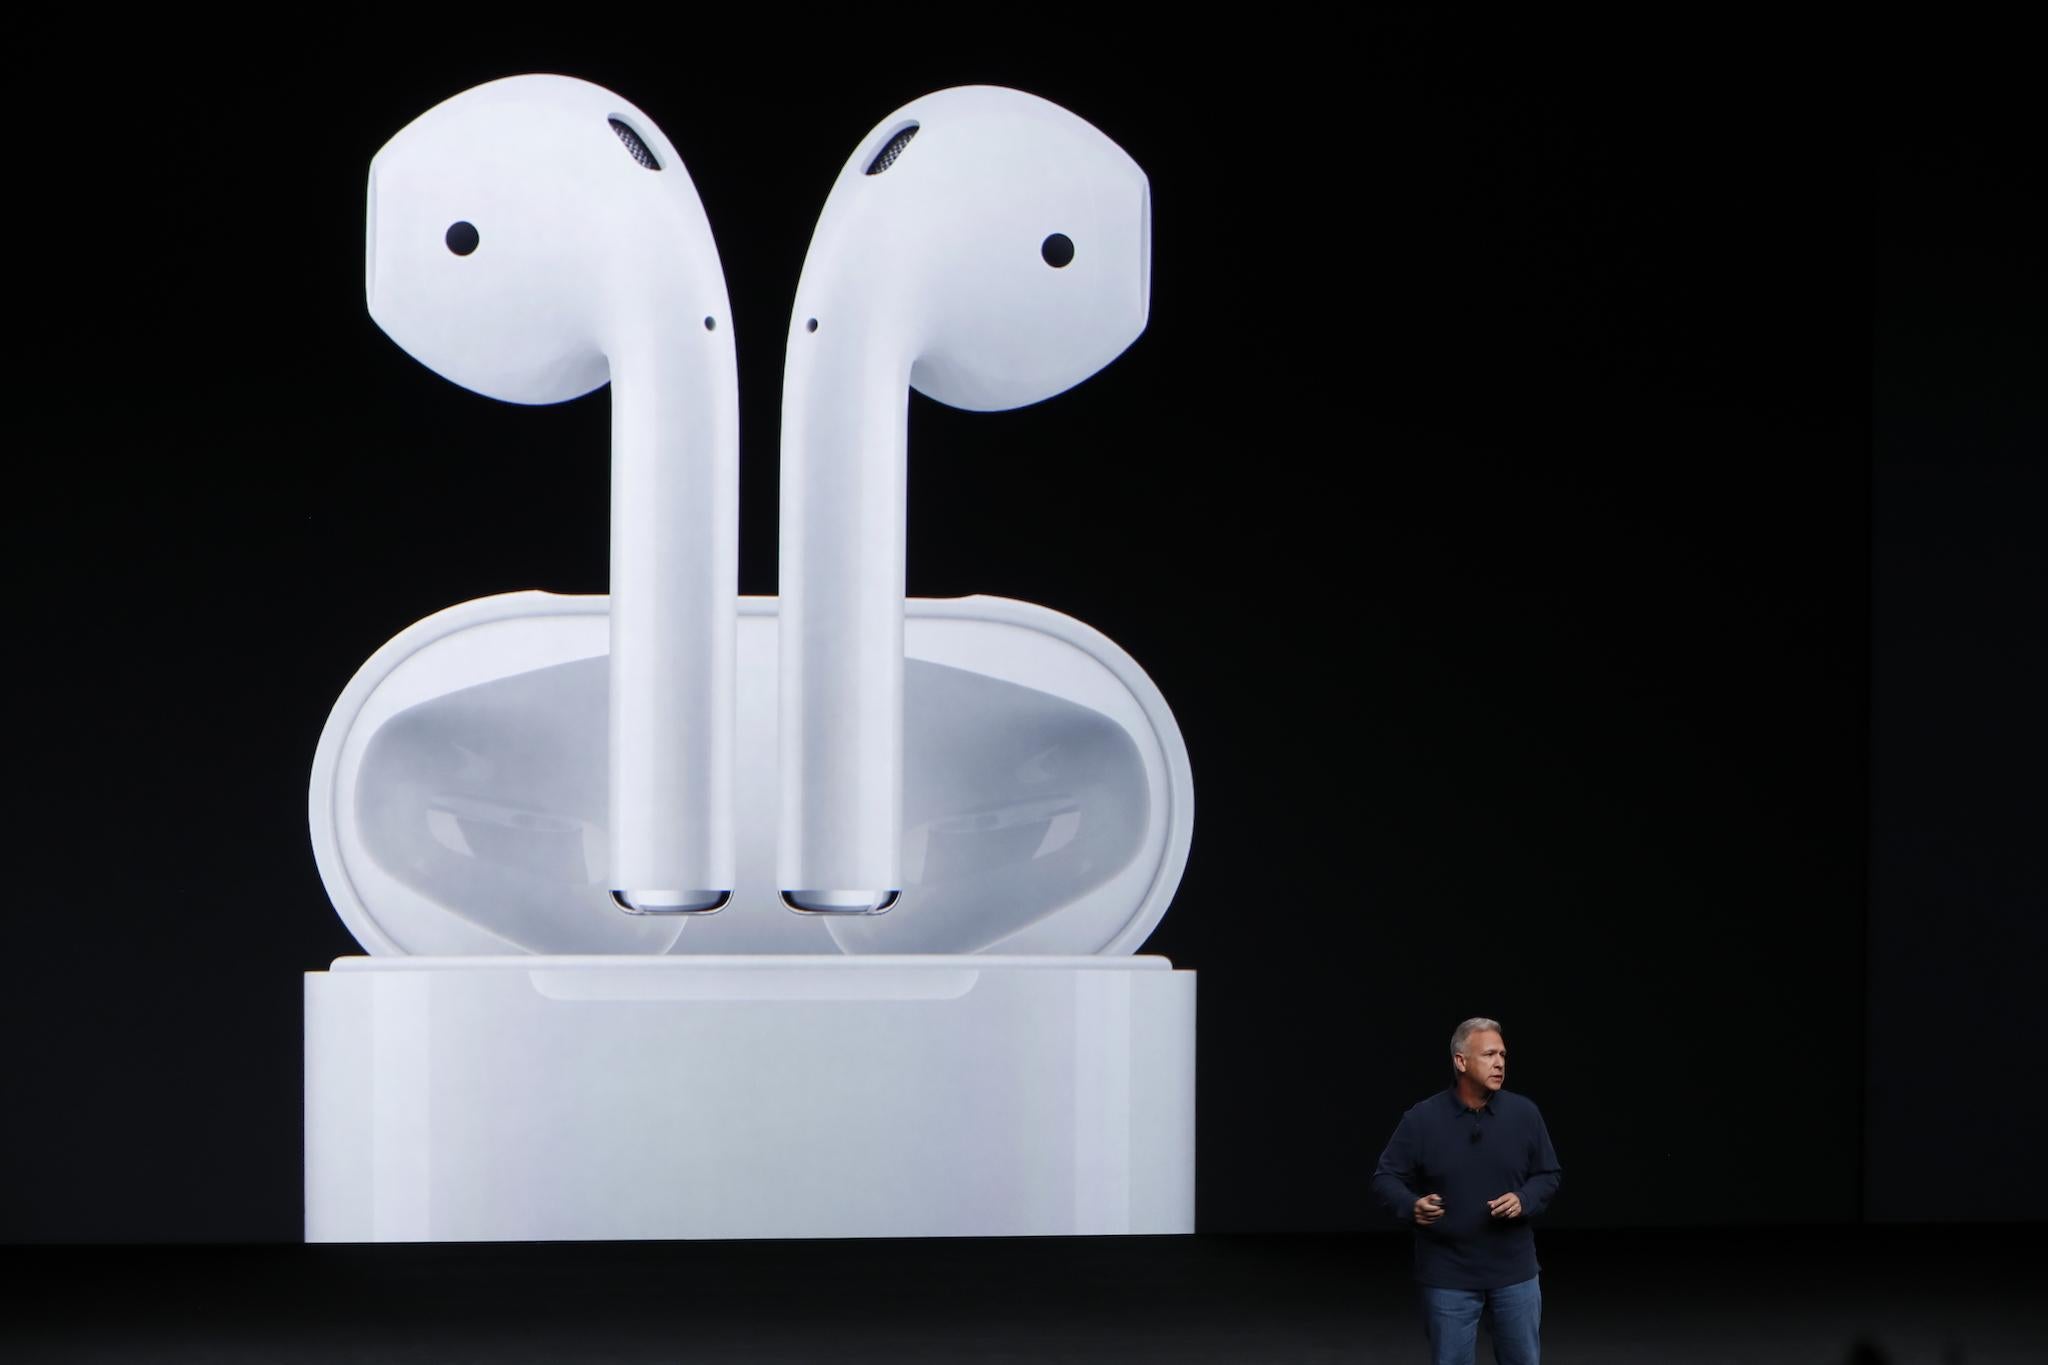 Apple Senior Vice President of Worldwide Marketing Phil Schiller announces AirPods during a launch event on September 7, 2016 in San Francisco, California